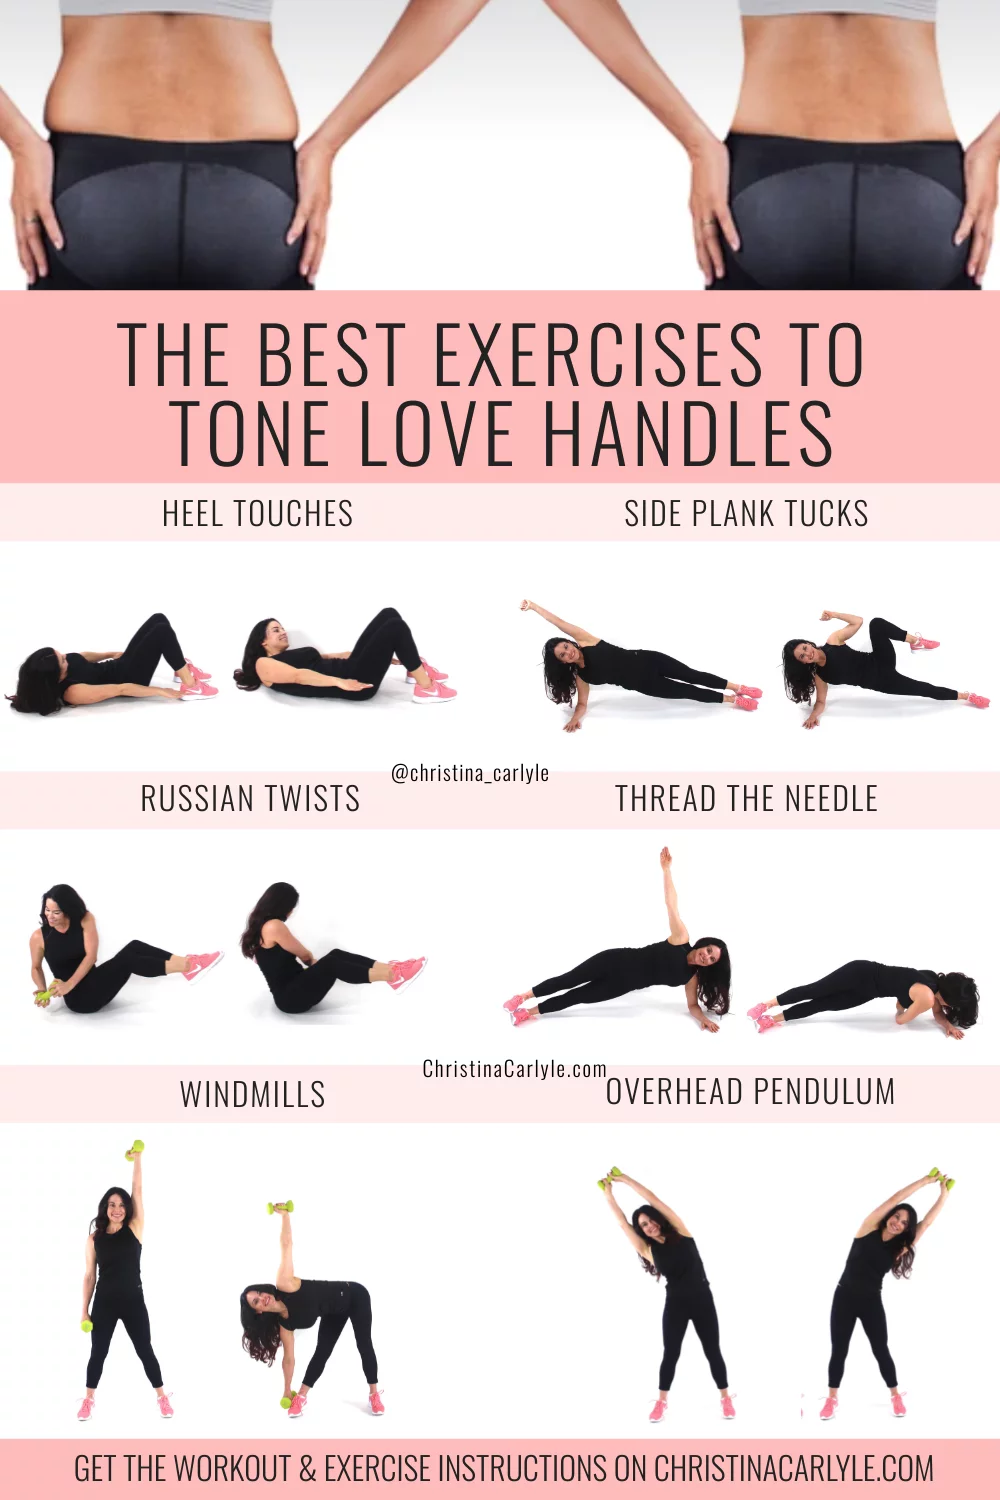 10 MIN. TINY WAIST WORKOUT - lose muffin top & love handles / No